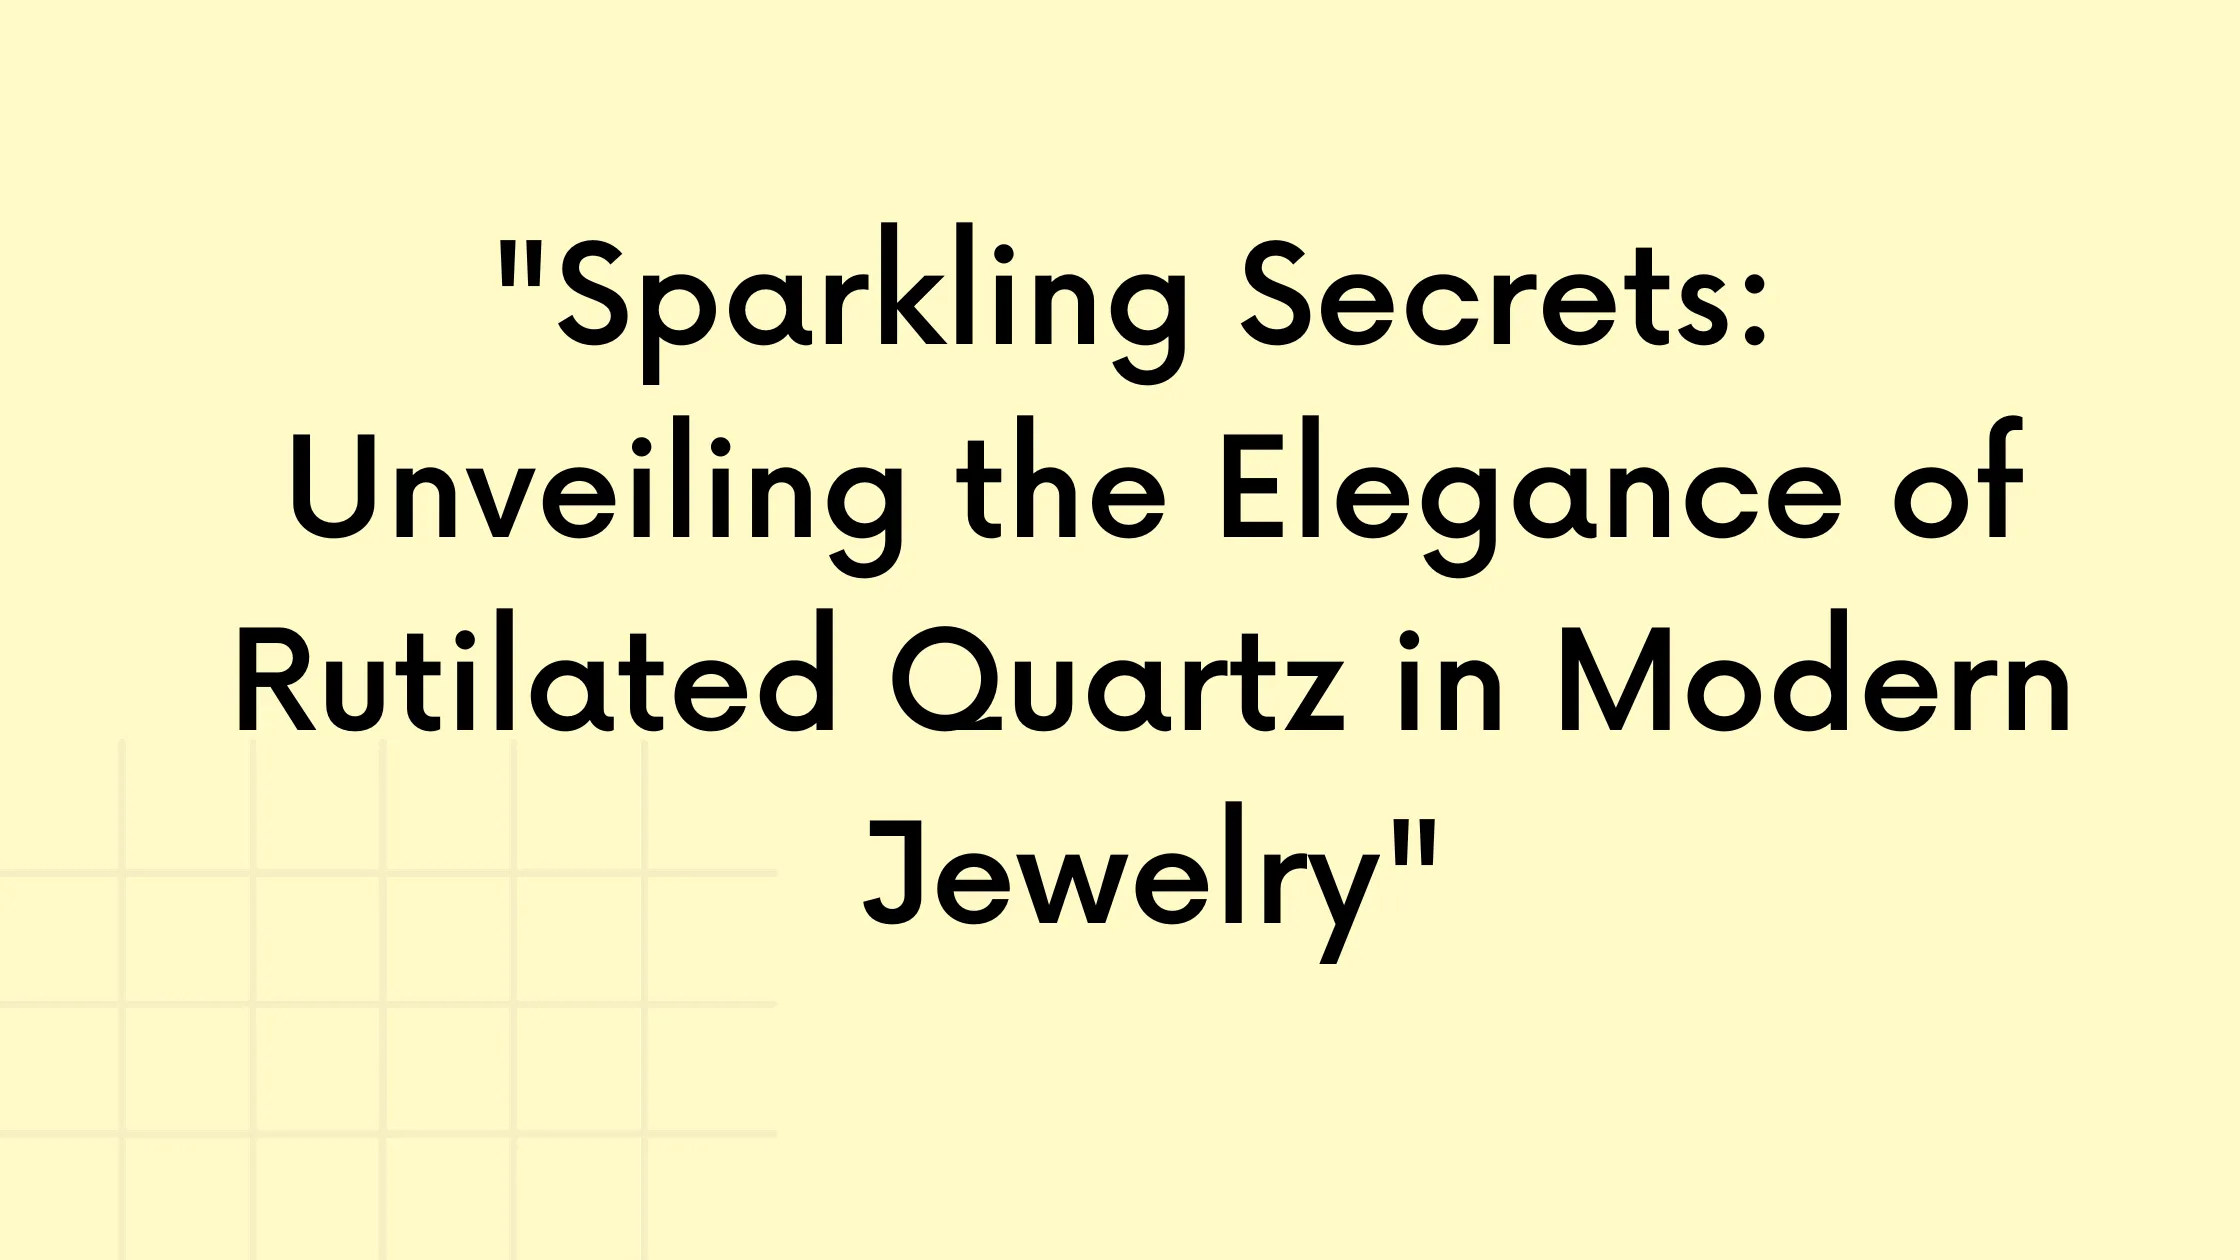 "Sparkling Secrets: Unveiling the Elegance of Rutilated Quartz in Modern Jewelry"